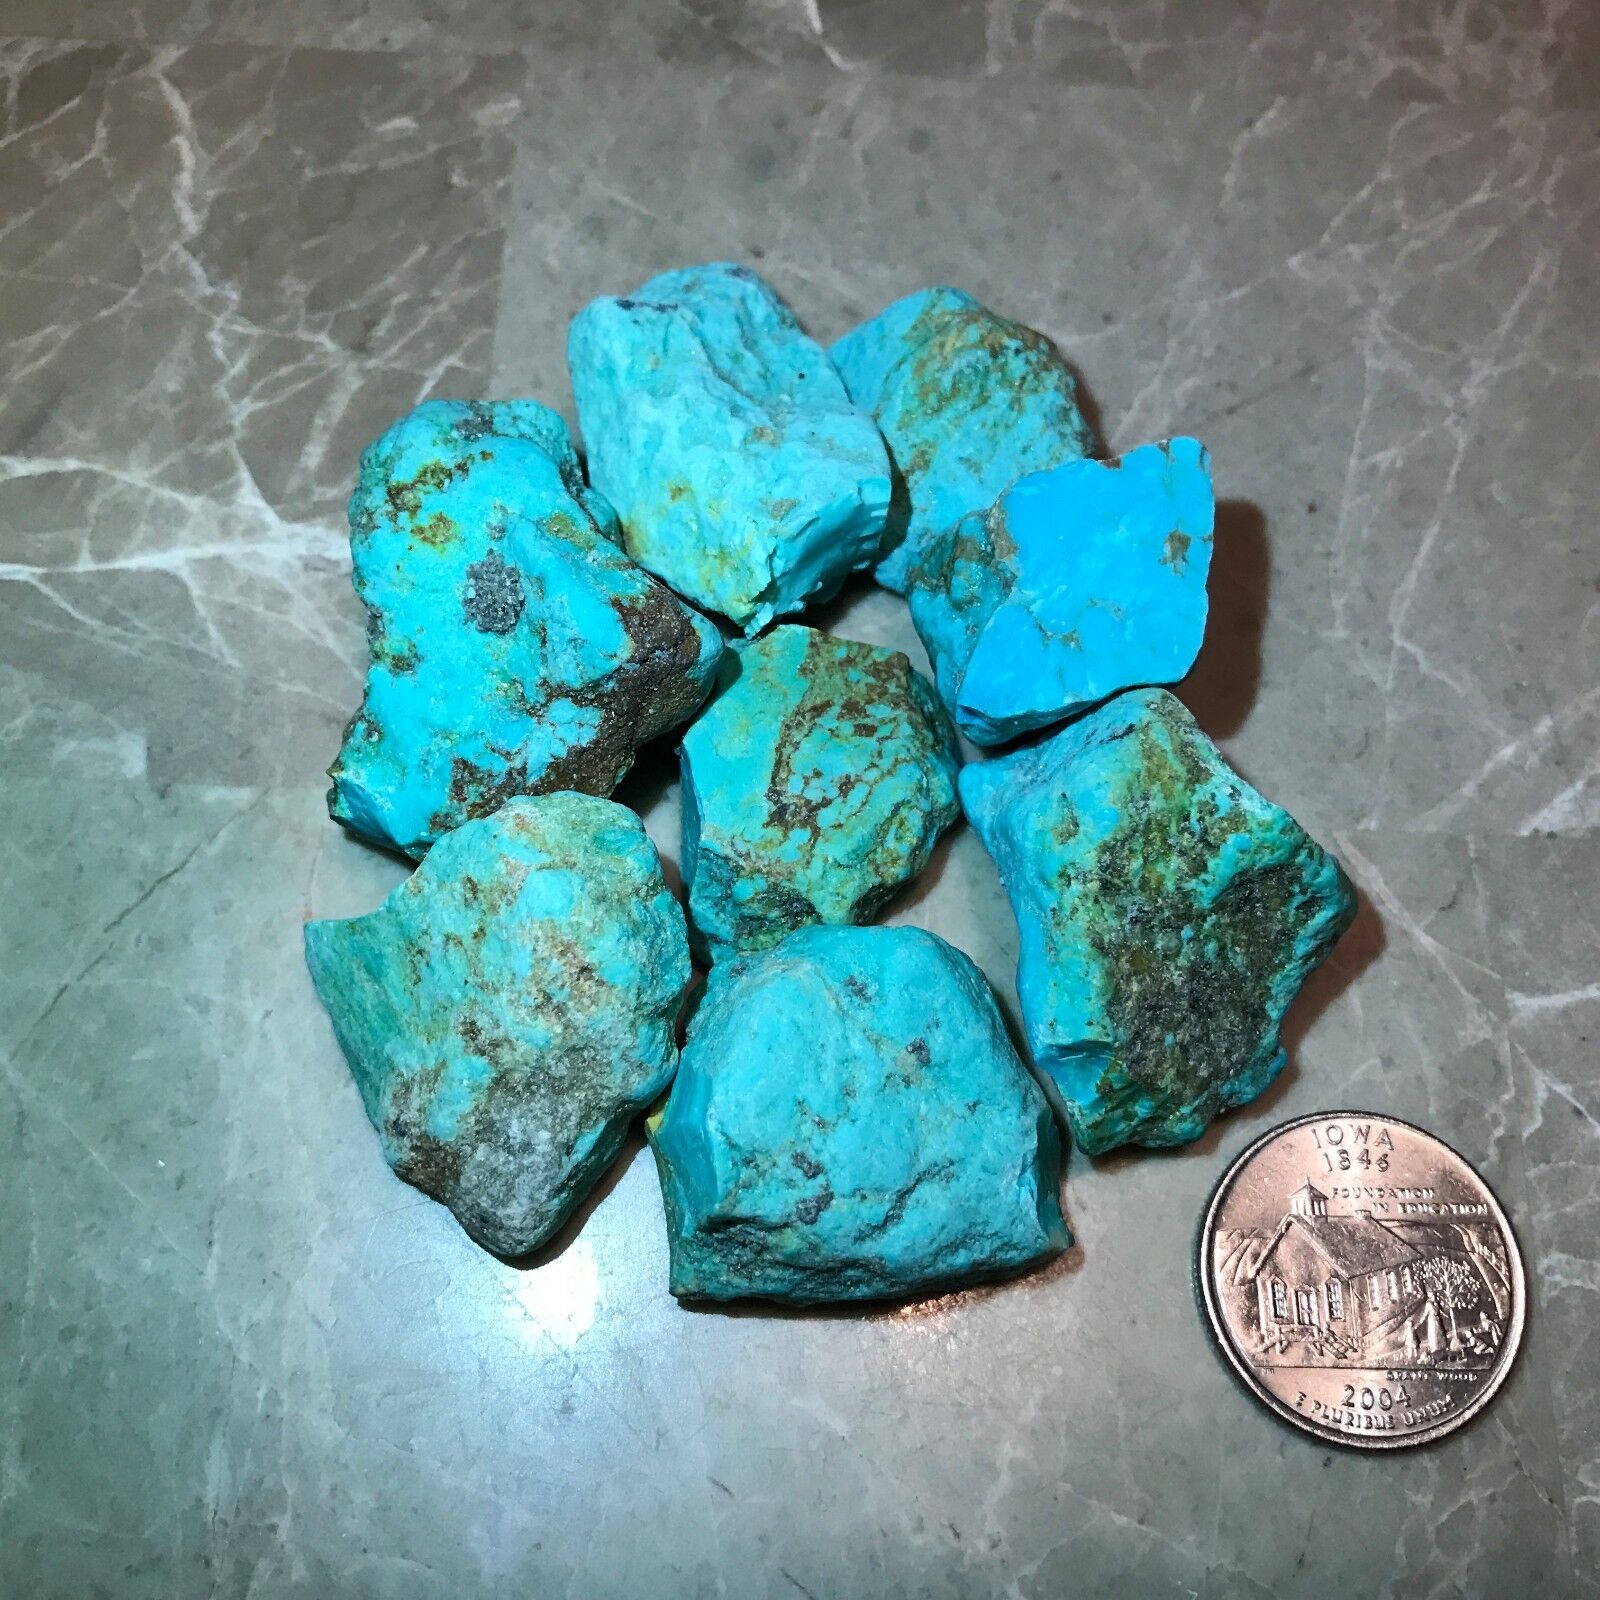 SLEEPING BEAUTY TURQUOISE NUGGETS ROUGH - 1/4 POUND LOT - VERY HIGH QUALITY